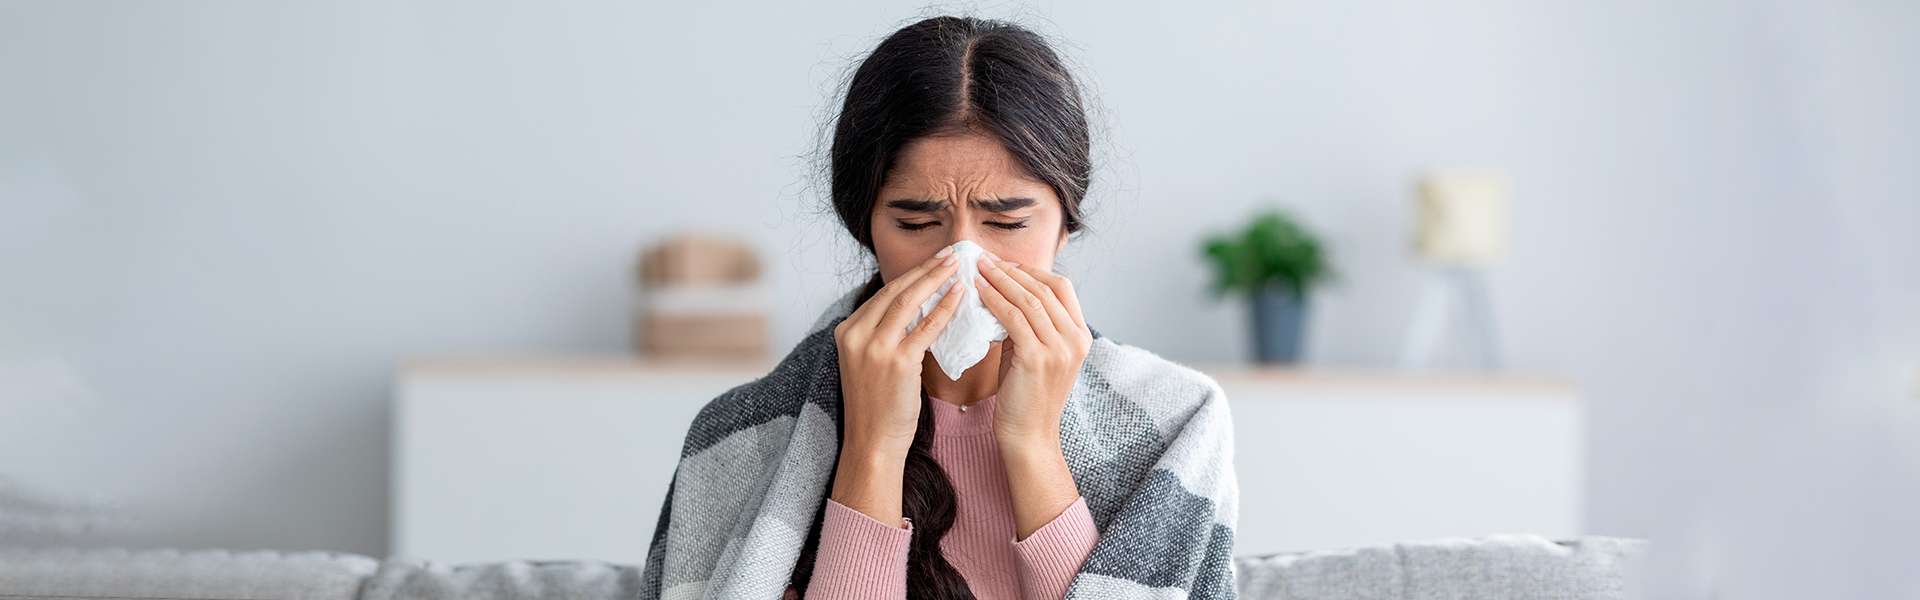 Treating a cold: symptoms, causes and remedies